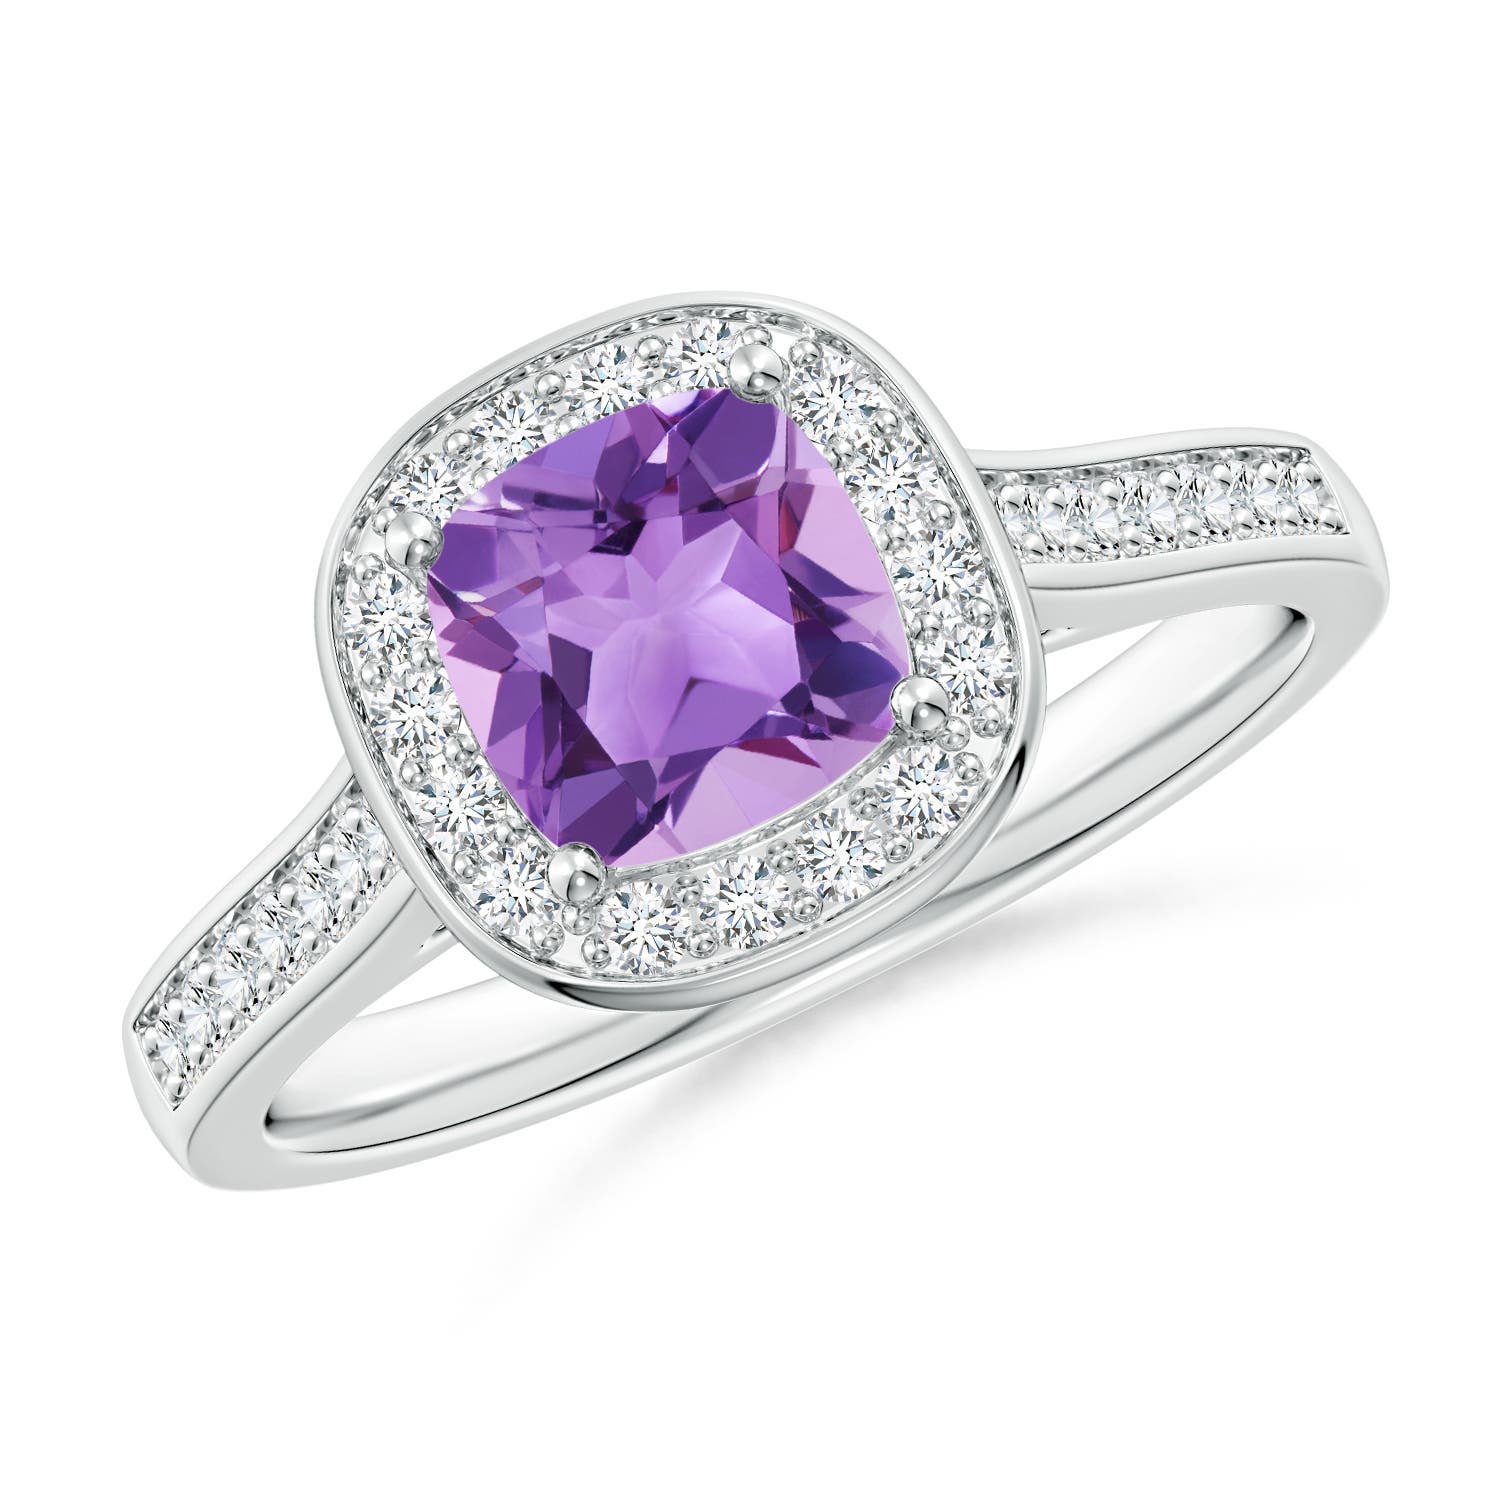 A - Amethyst / 1.08 CT / 14 KT White Gold